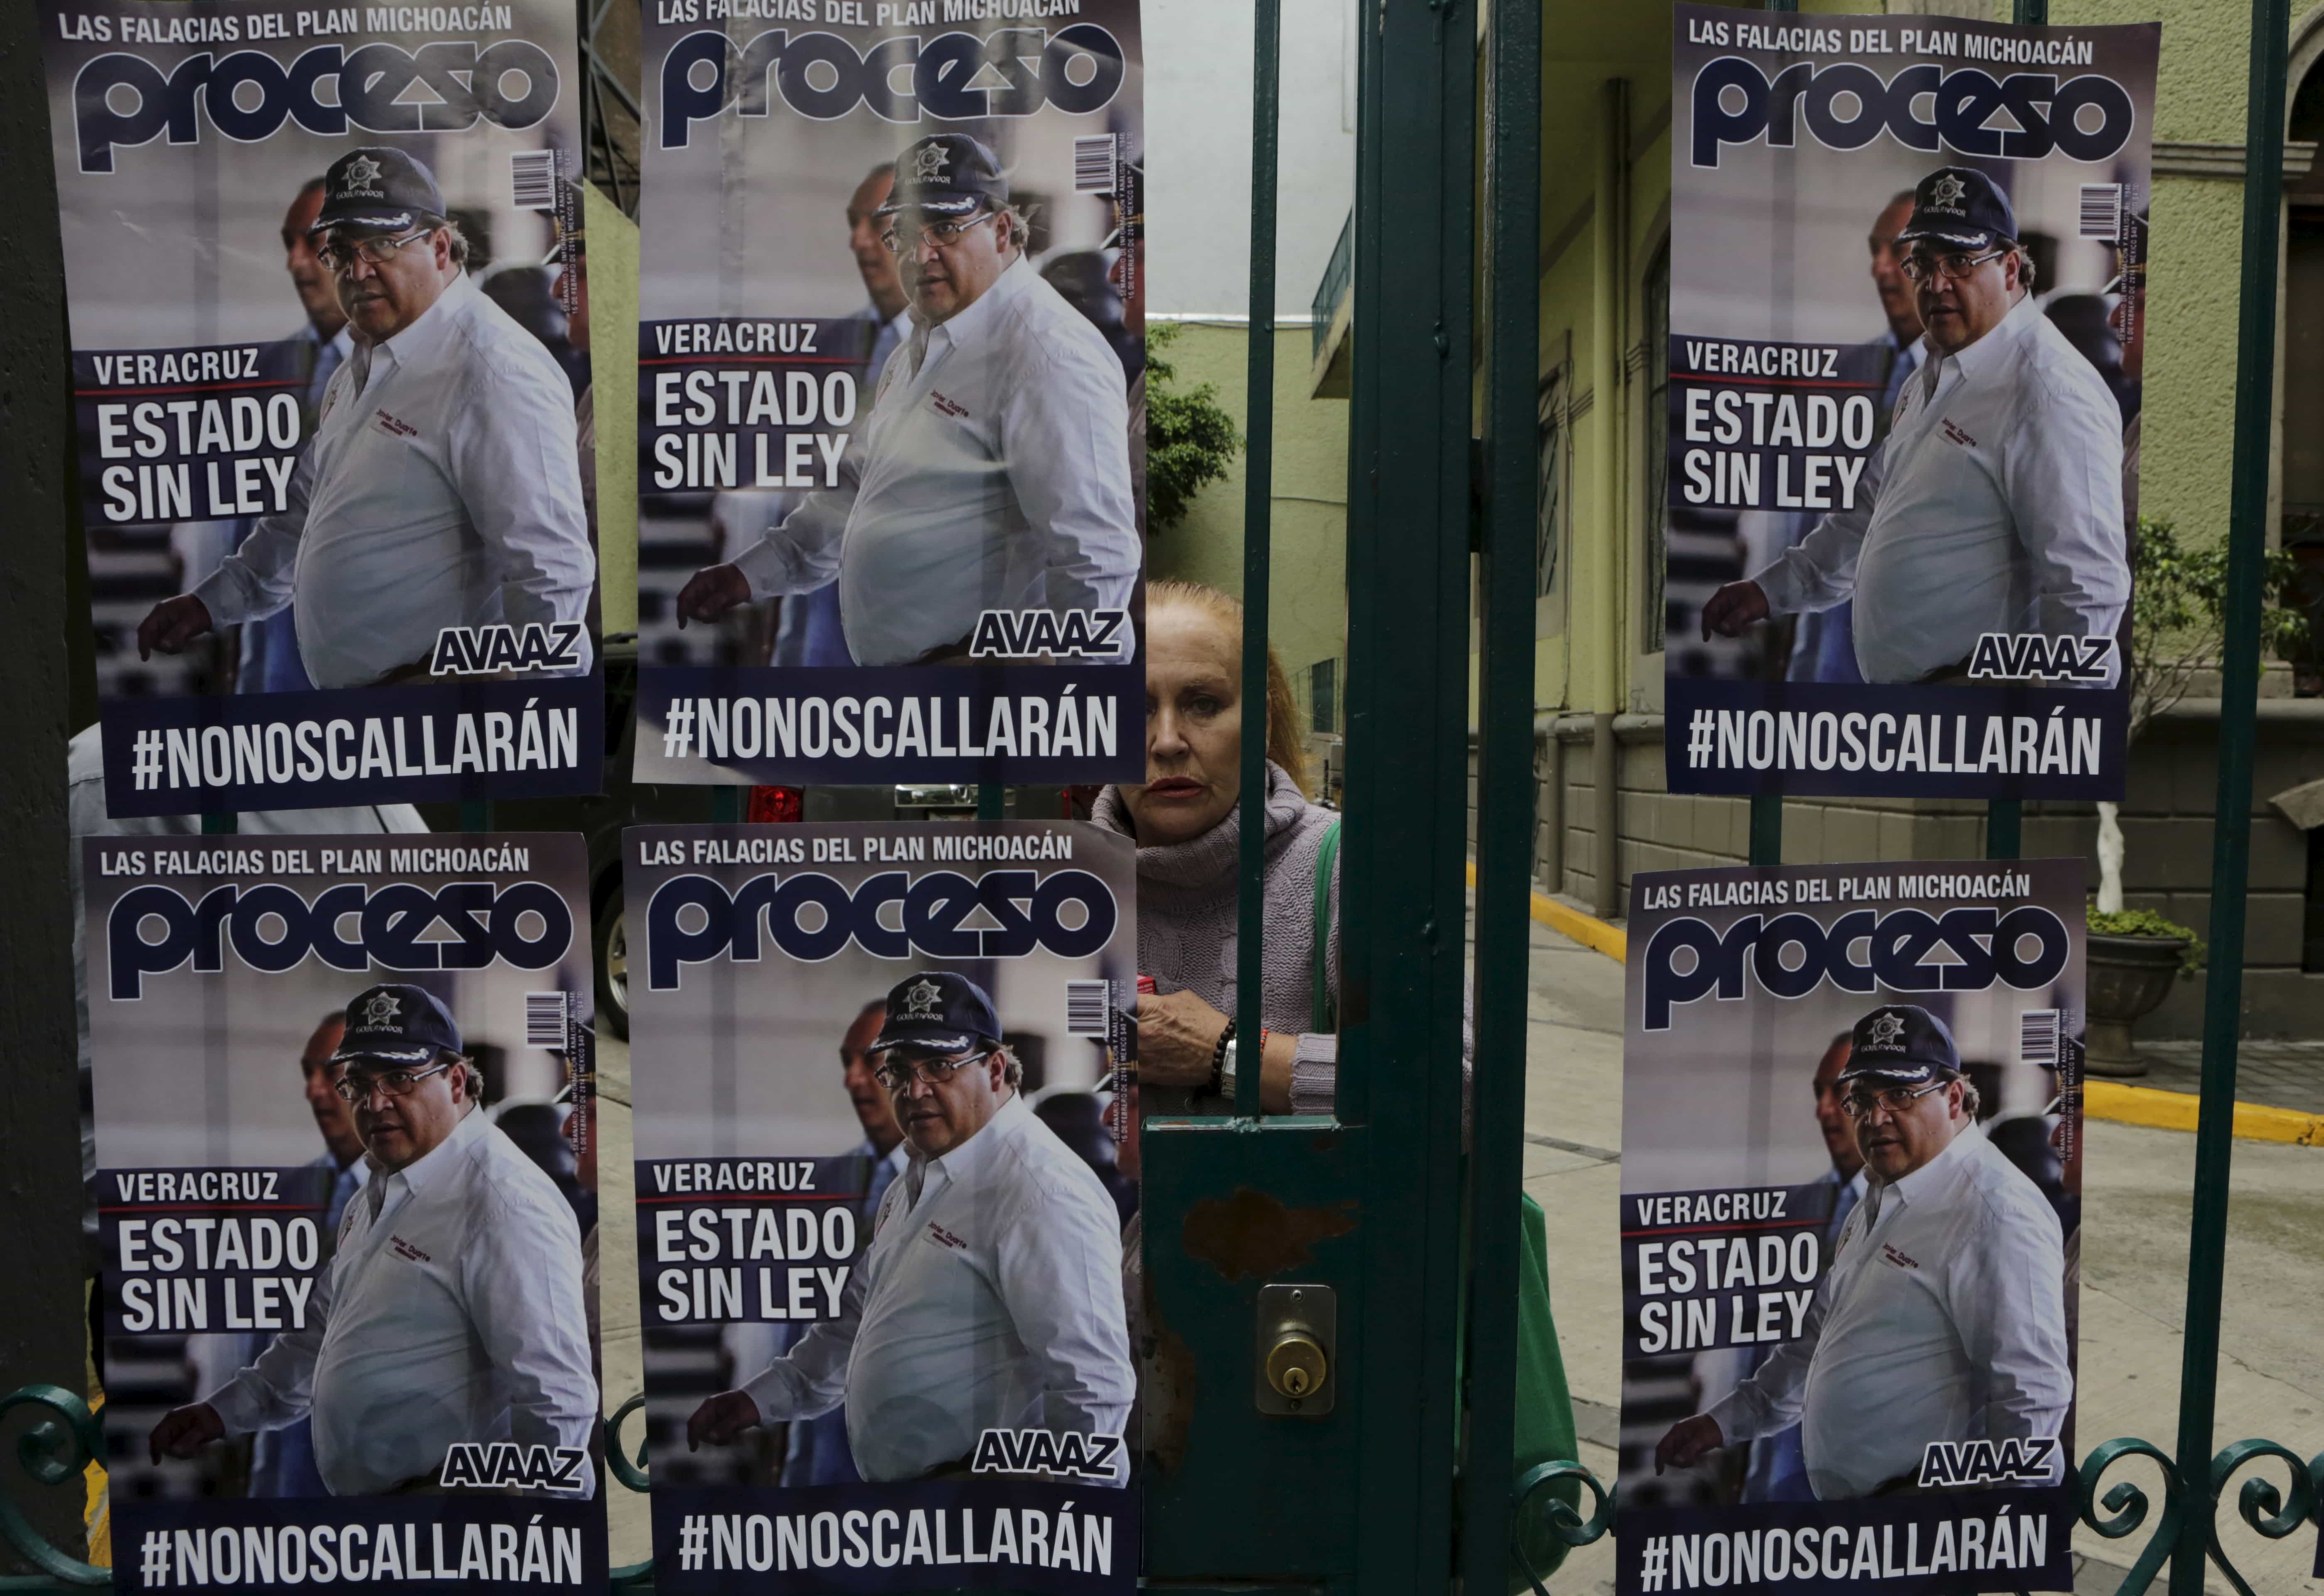 A passerby looks at posters of Veracruz state governor Javier Duarte with the words "State without law" during a demonstration outside the Government of Veracruz building in Mexico City on Aug. 31, 2015 against the murder of photojournalist Ruben Espinosa and four women, REUTERS/Henry Romero